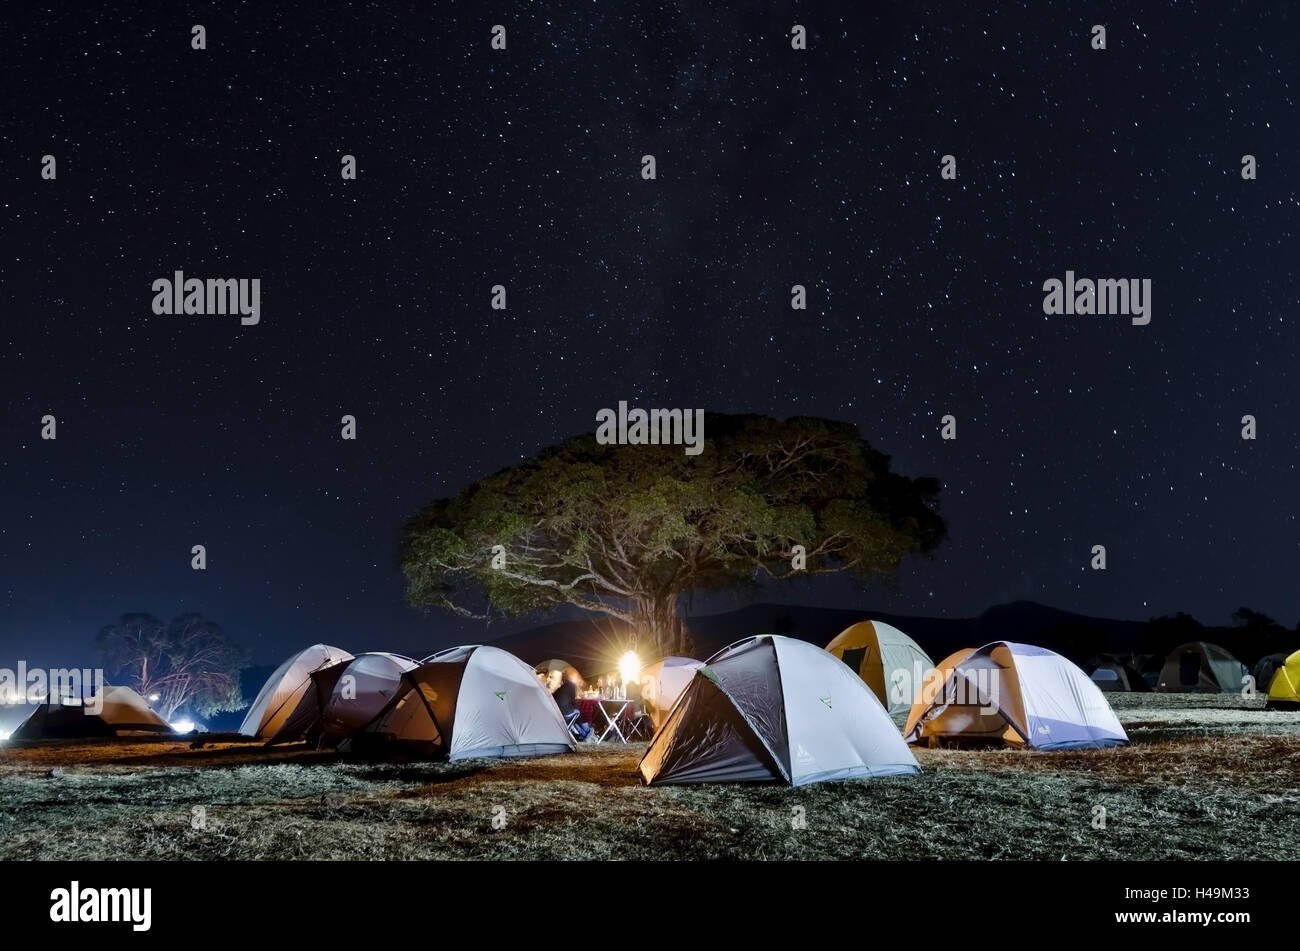 Africa, Tanzania, East Africa, crater, volcano crater, Ngorongoro, tent camp, camp site, Stock Photo